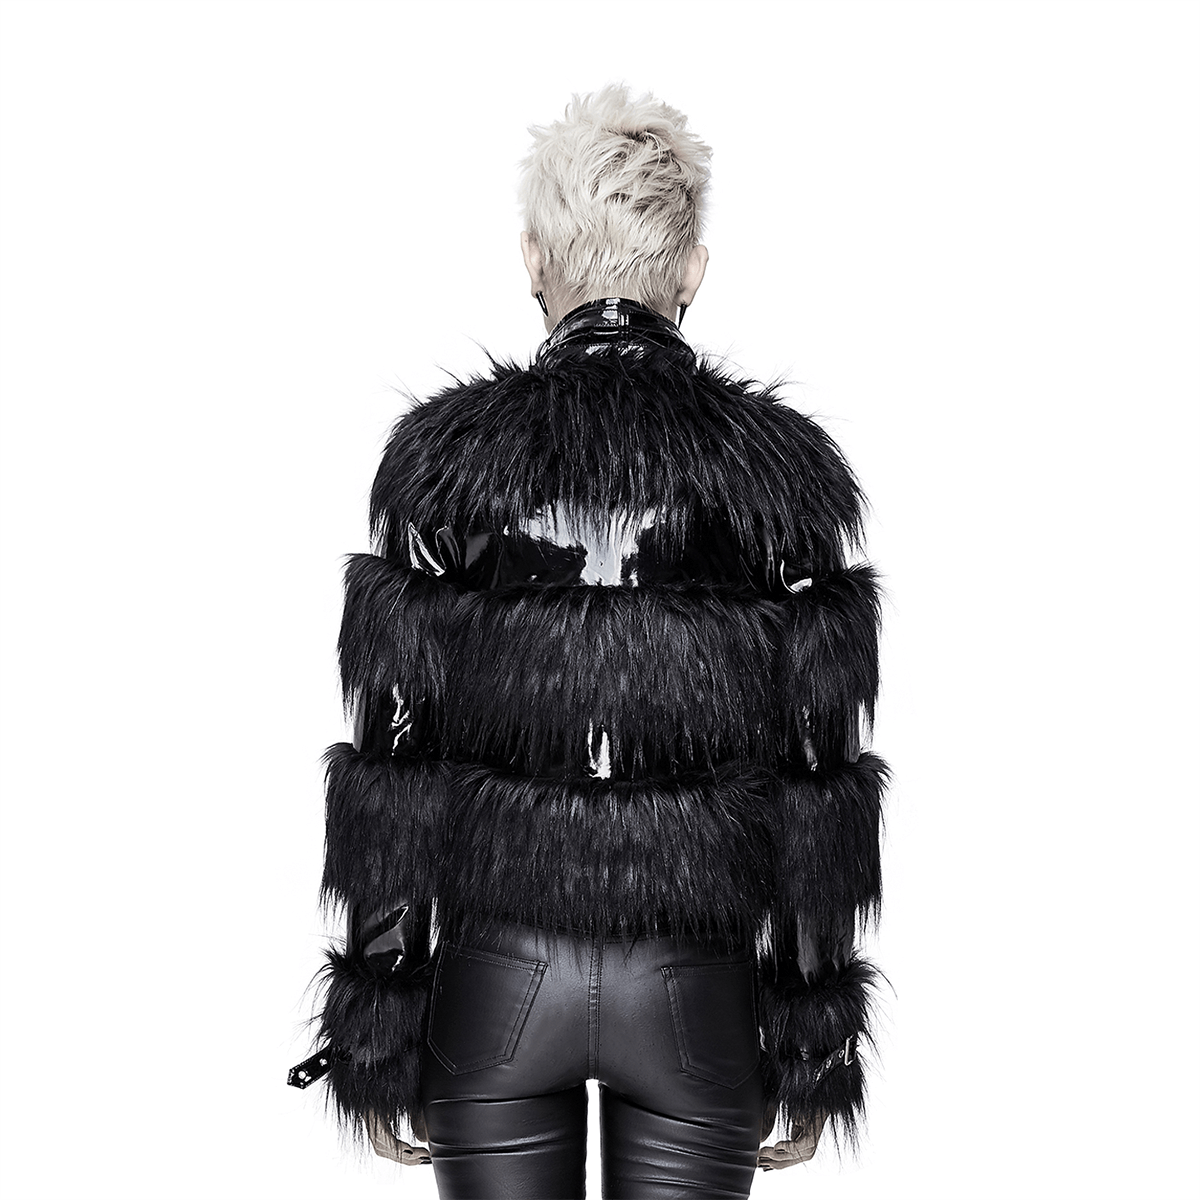 Stylish Women's Jacket Decorated with a Fur / Shiny Pu Leather Jacket with Buckles on the Neck - HARD'N'HEAVY